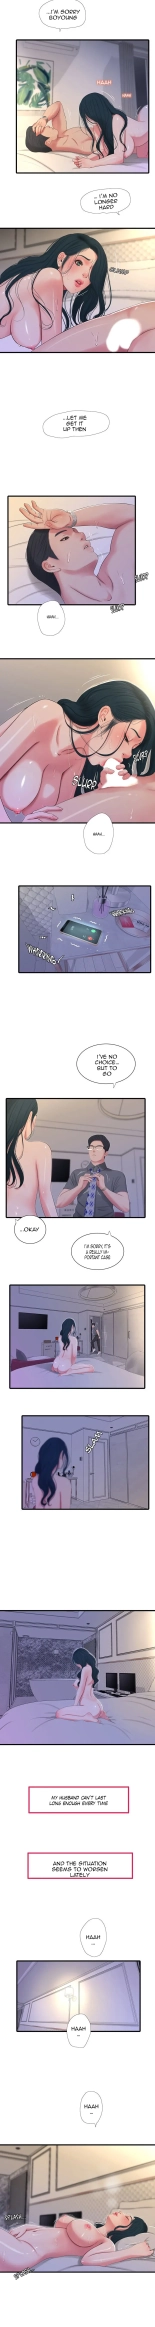 One's In-Laws Virgins Ch. 26-30 : page 9